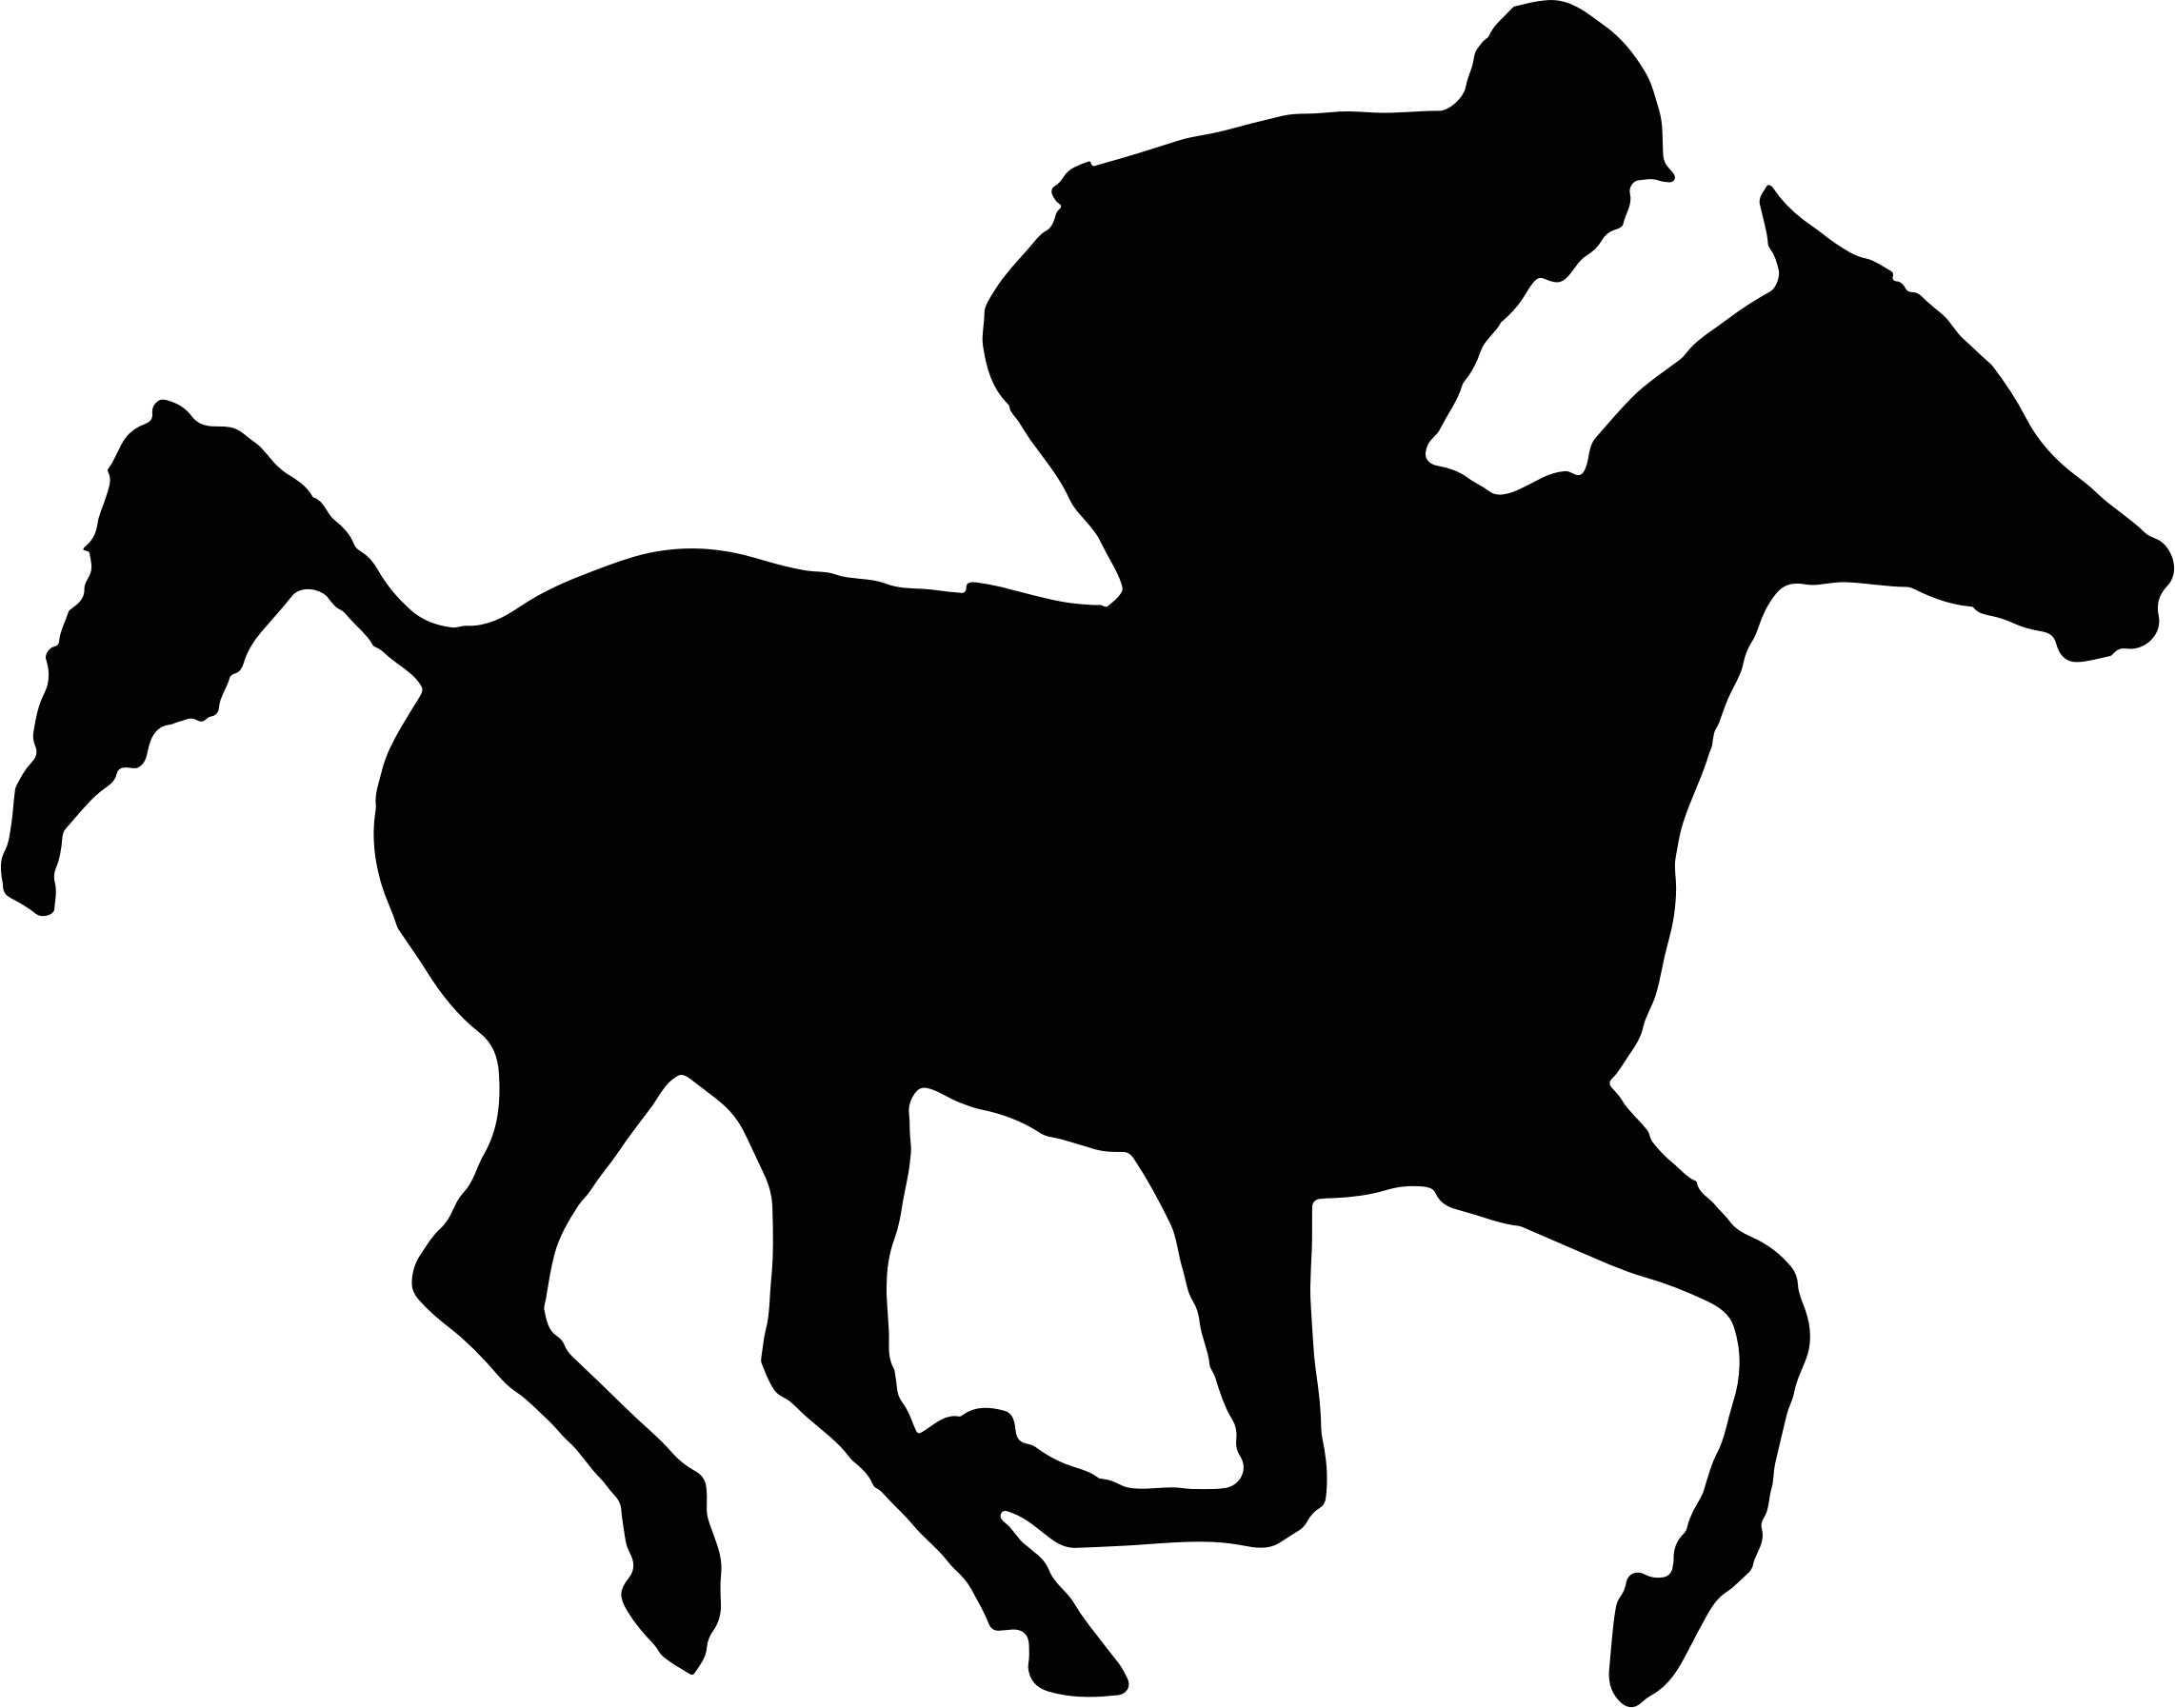 horse racing silhouette png
